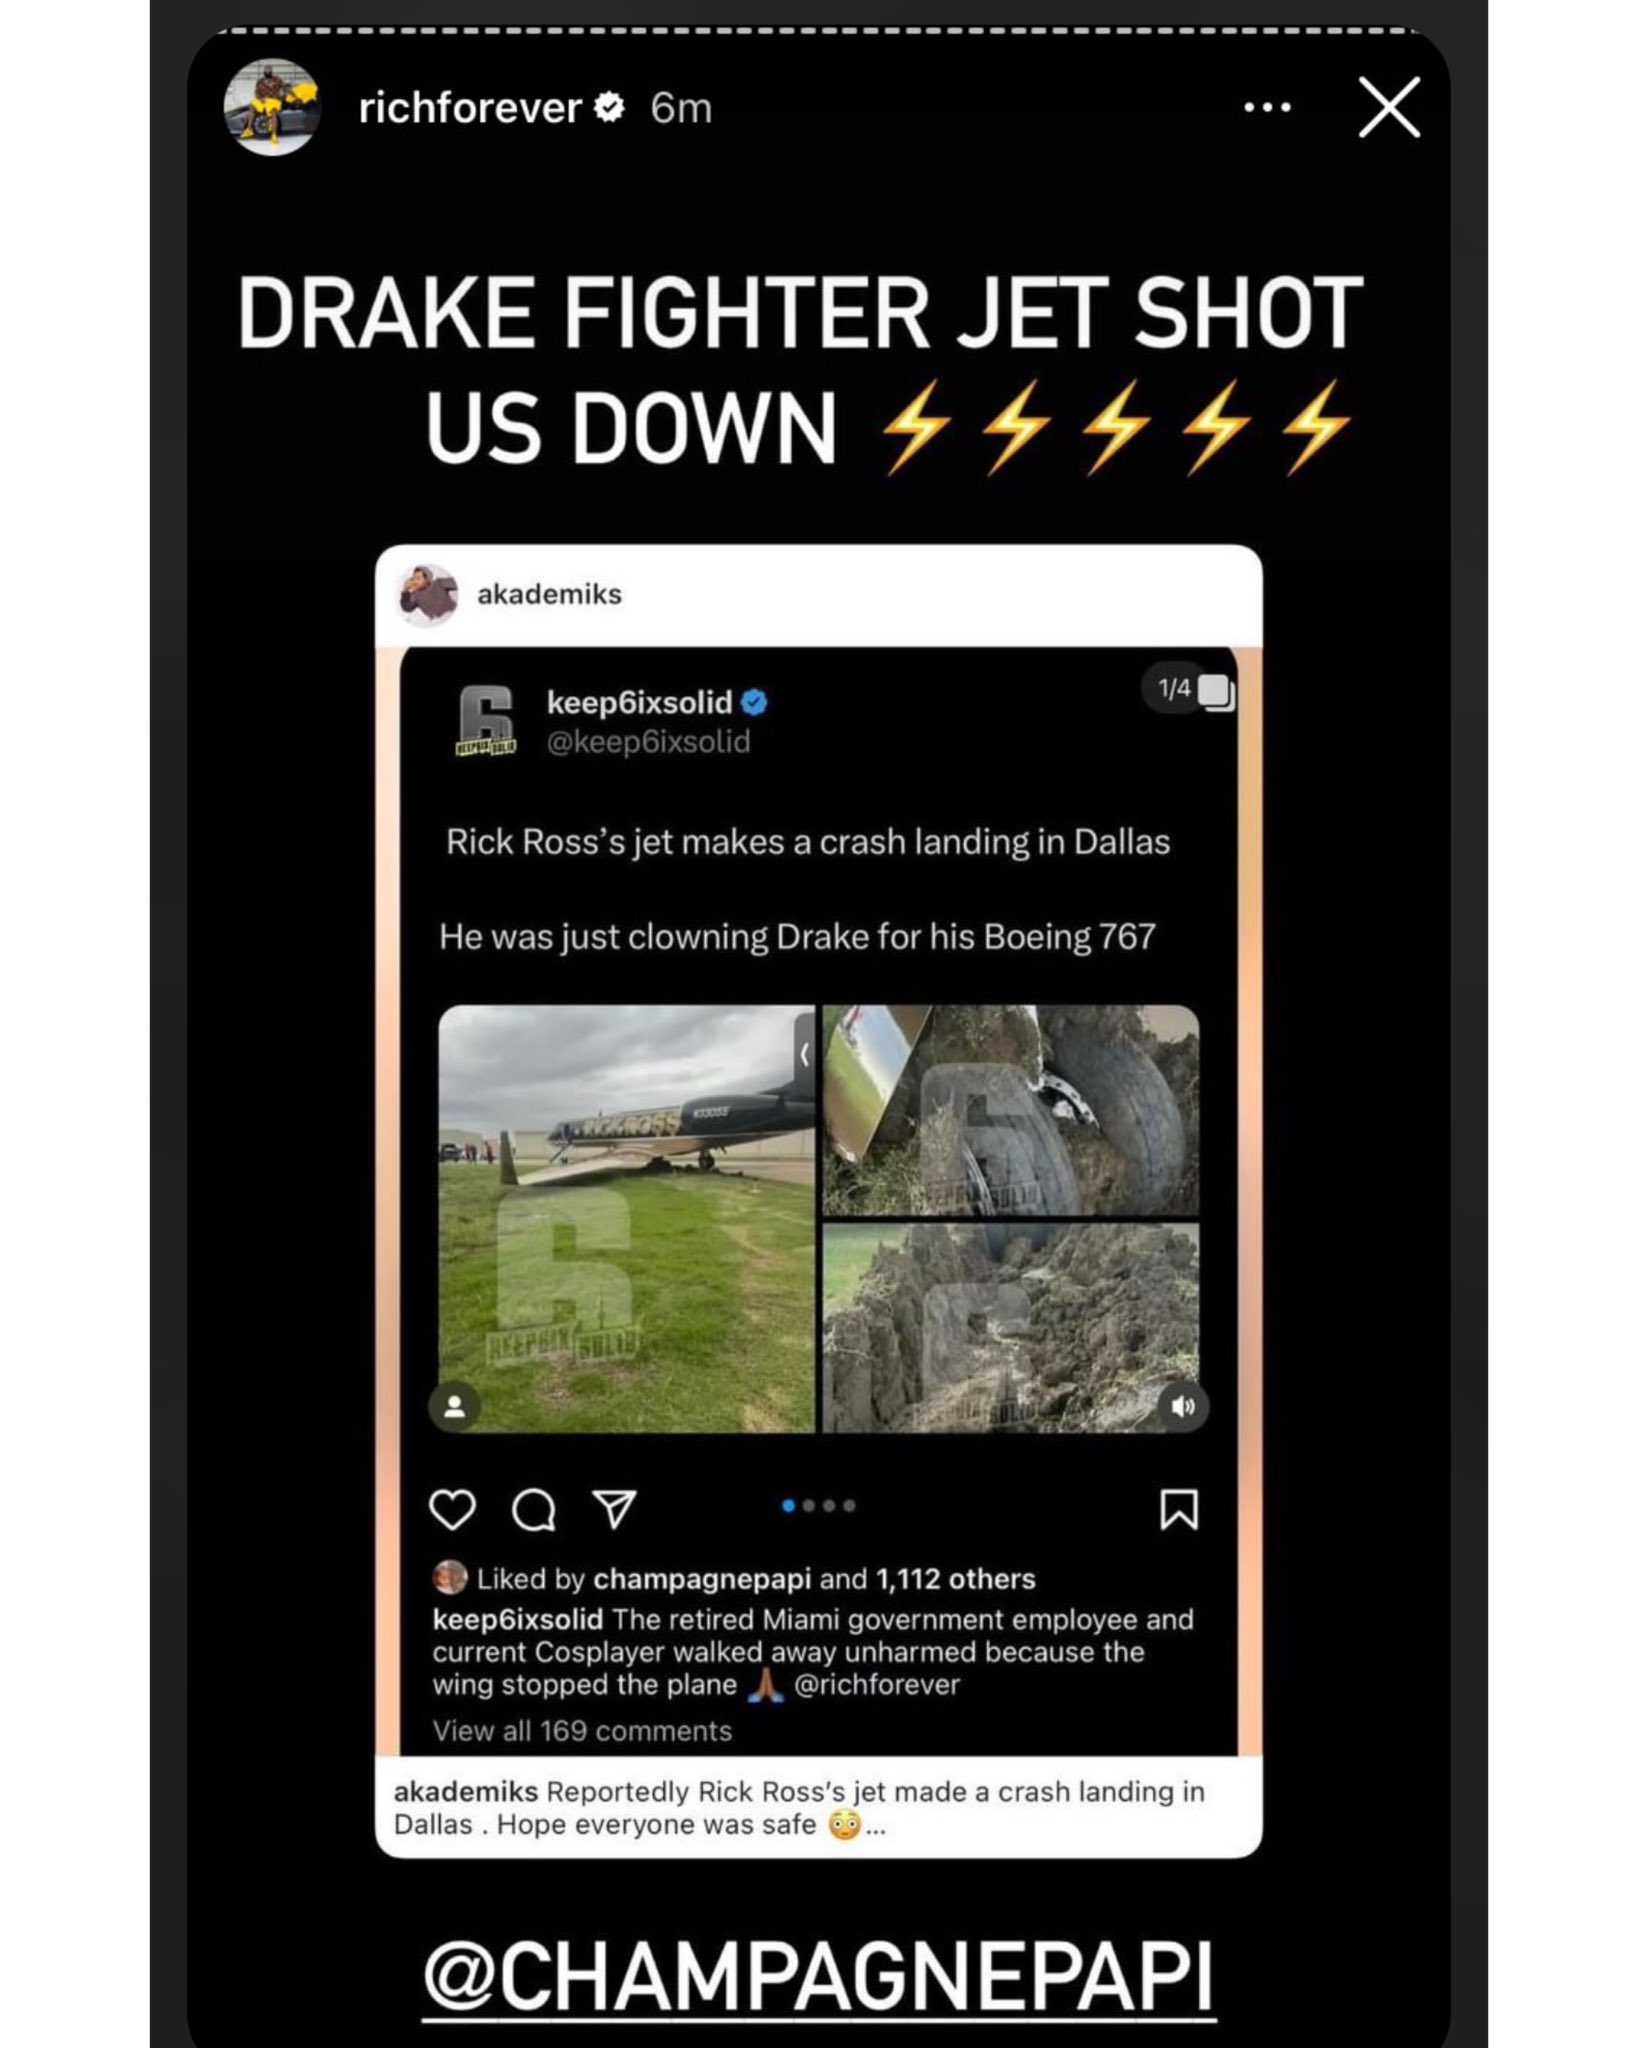 Rick Ross's jet reportedly crash-landed in Dallas, and Drake liked the post